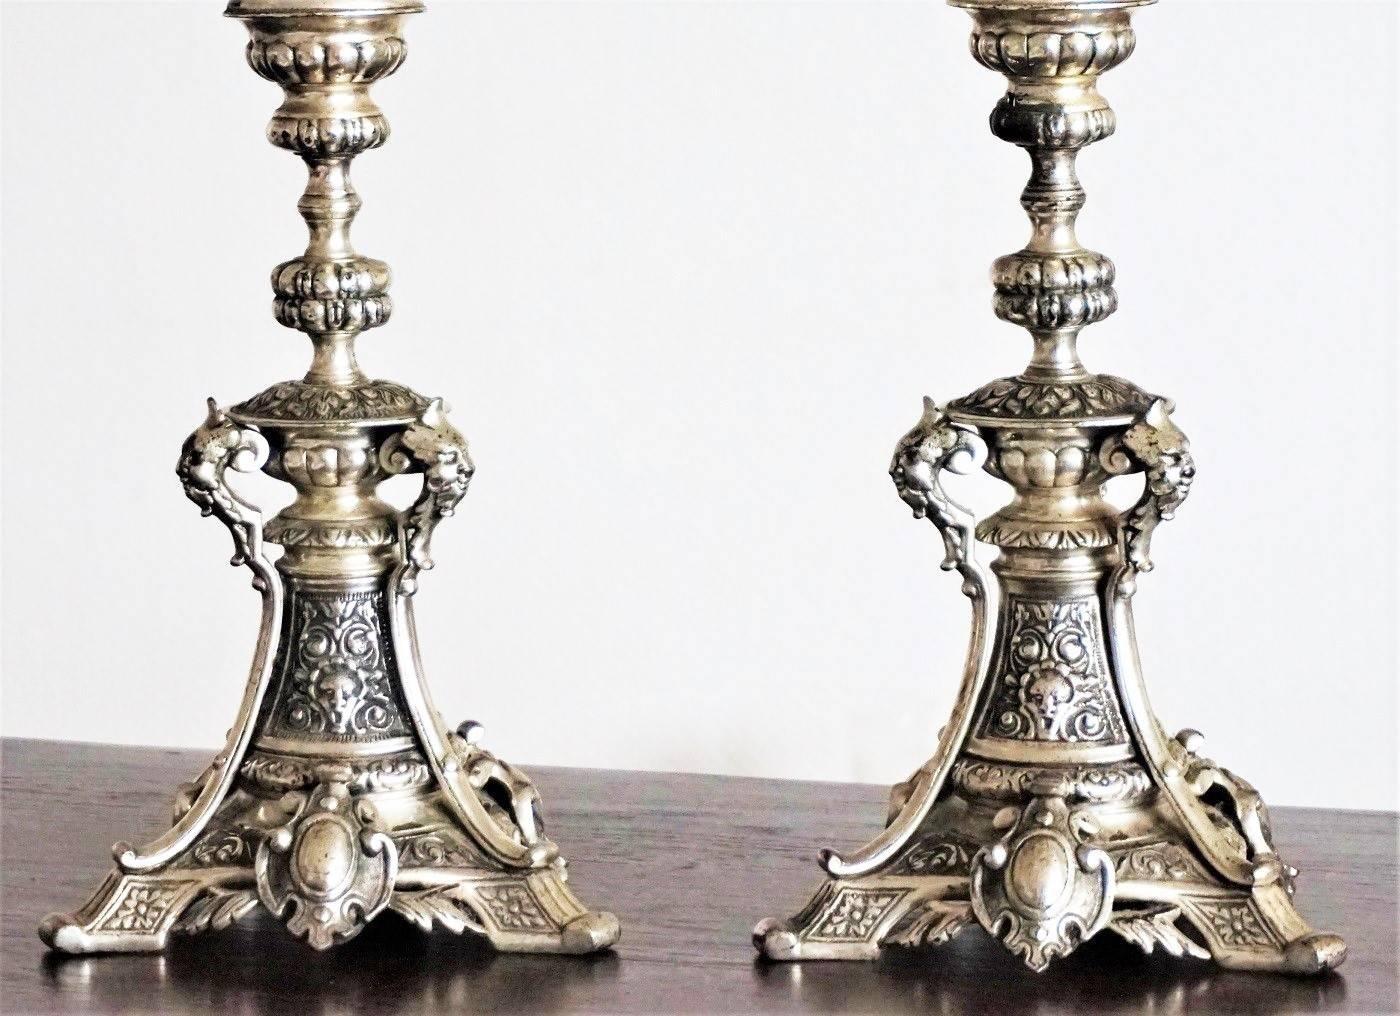 Gothic Revival 19th Century Pair of Silver Plated Candlesticks with Gothic Ornaments Candelabra